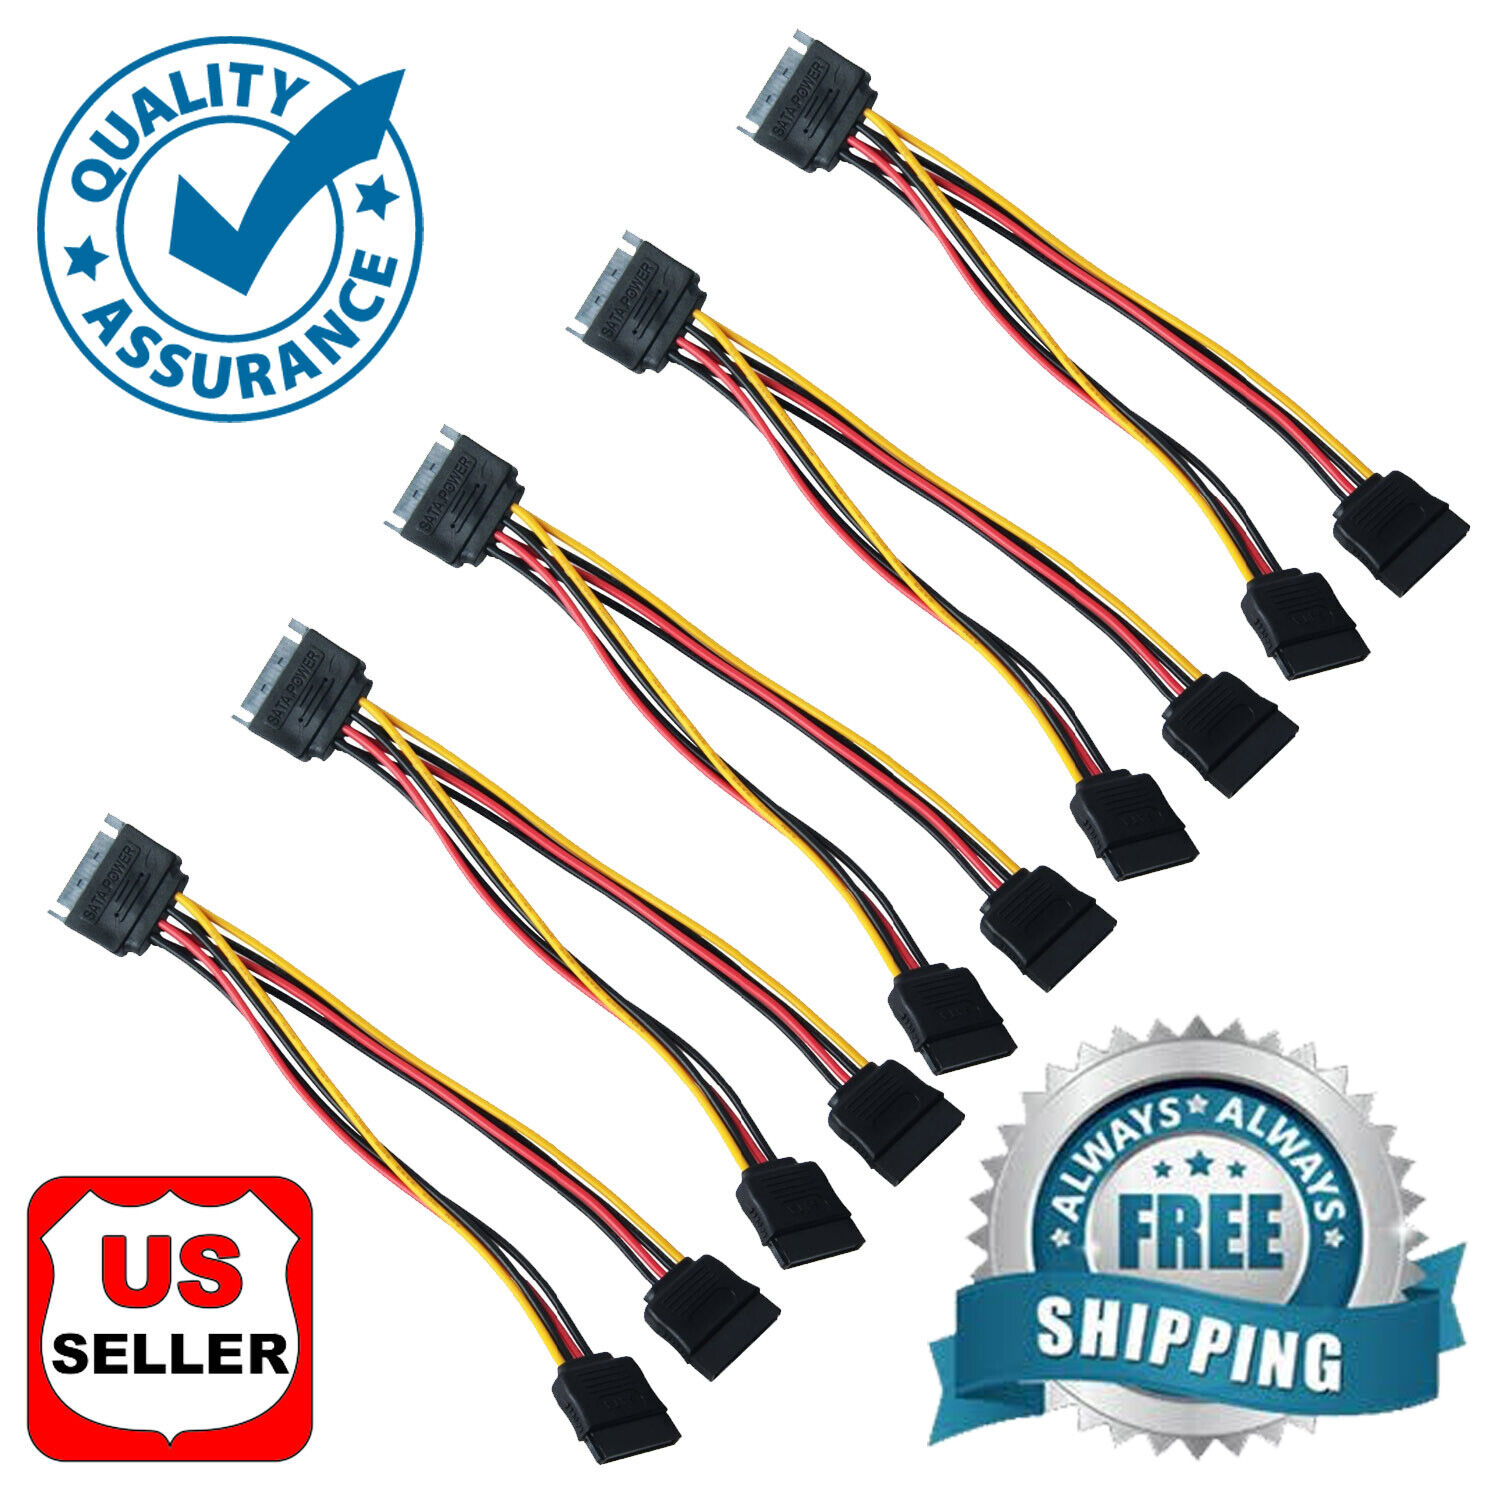 Lot 5 x 6 inch SATA 15-Pin Male to Dual Female Power Y-Splitter Adapter Cable